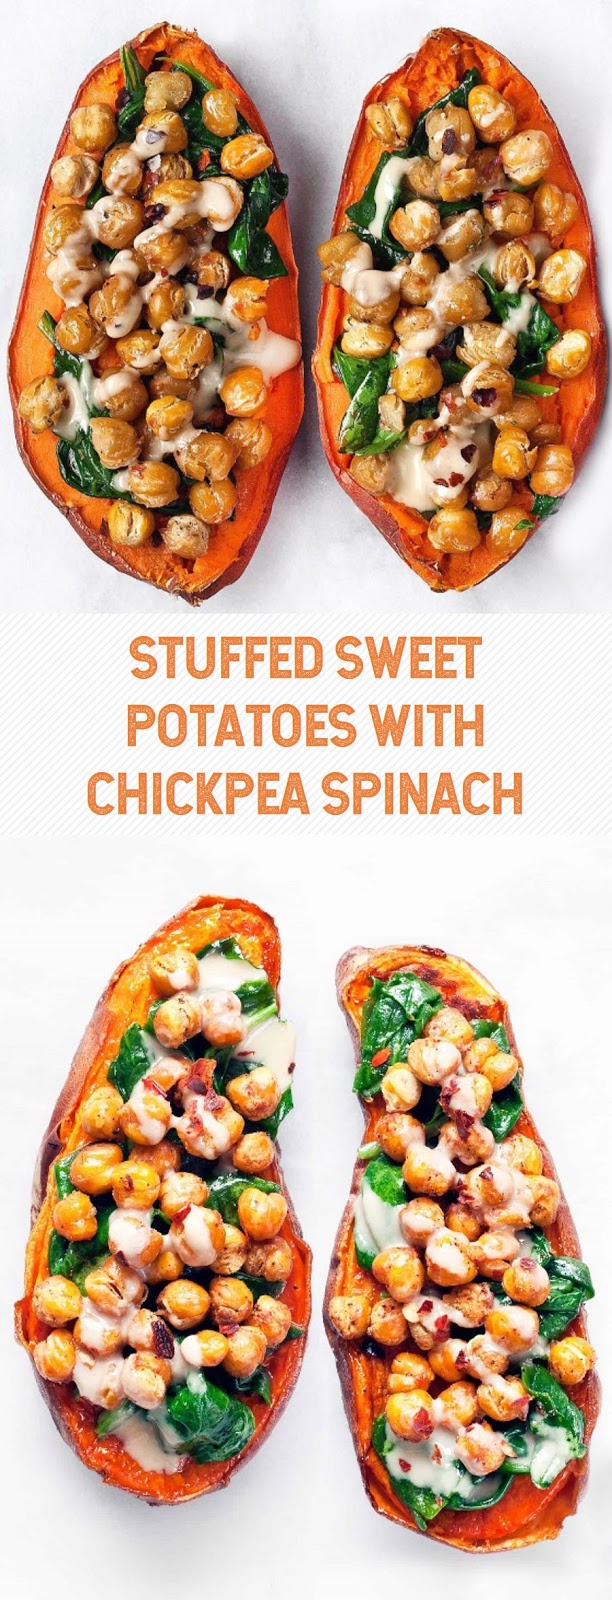 STUFFED SWEET POTATOES WITH CHICKPEA SPINACH 